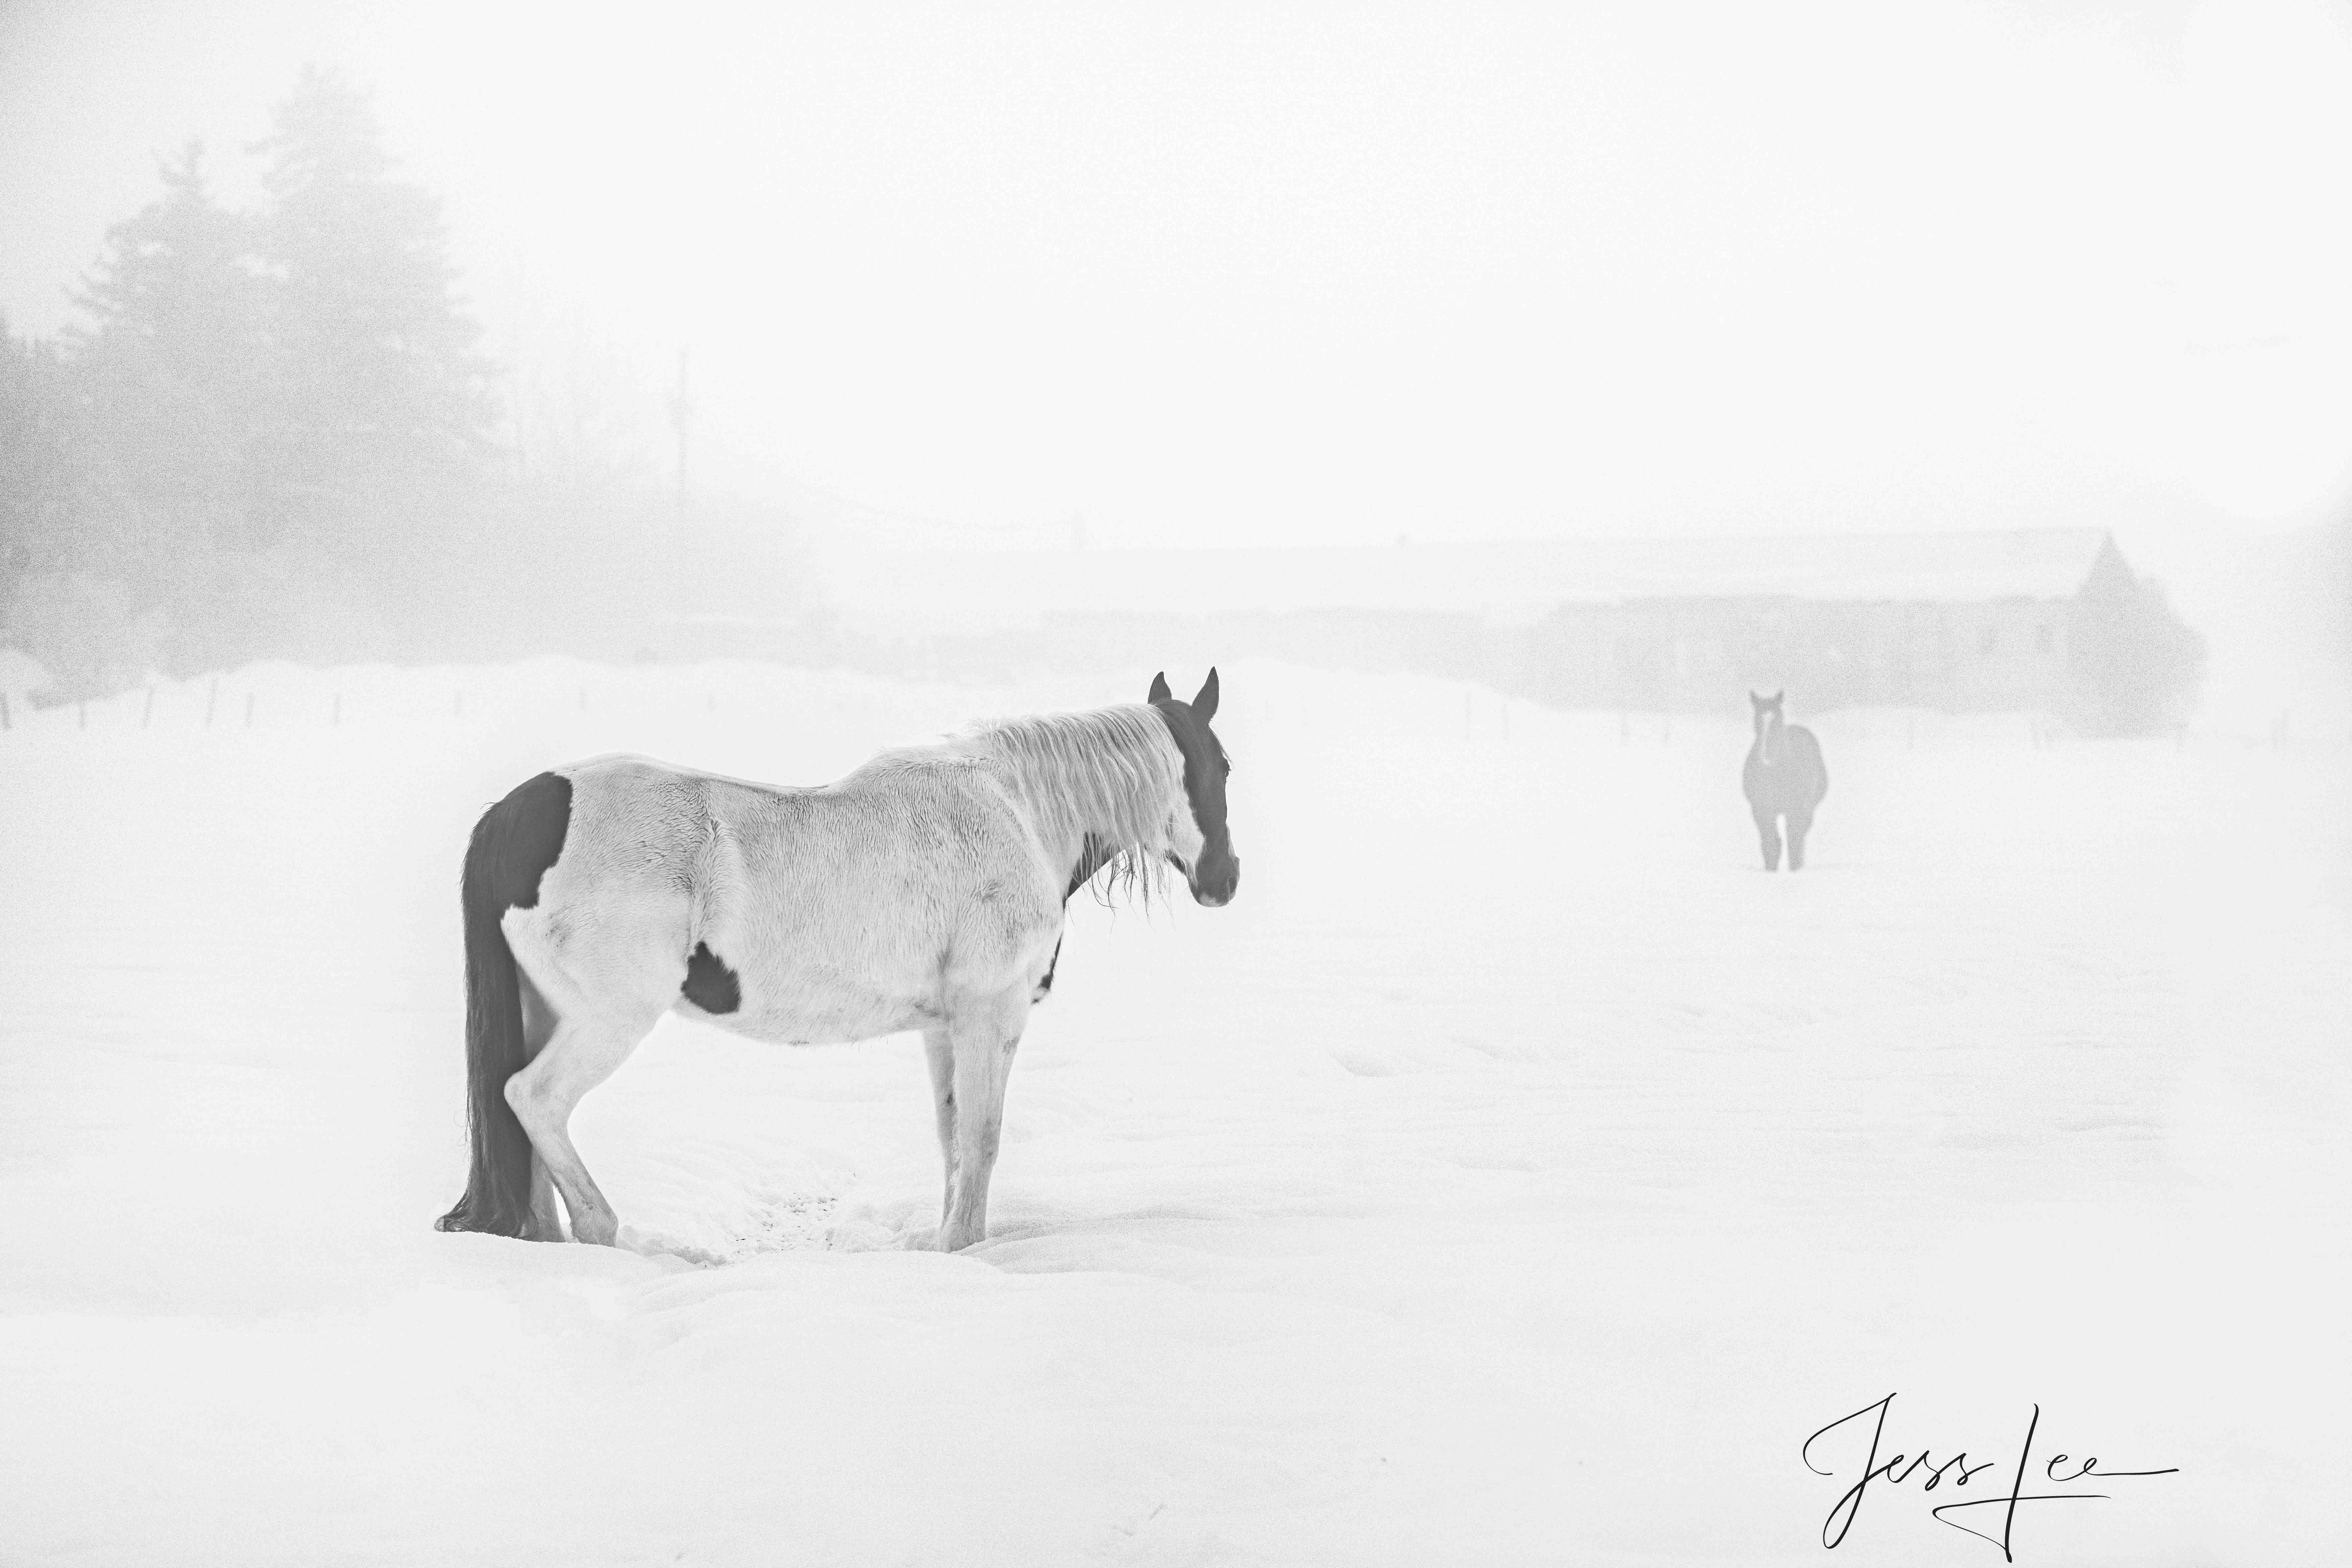 A strange lone horse approaching the barn and another horse in the winter morning fog.